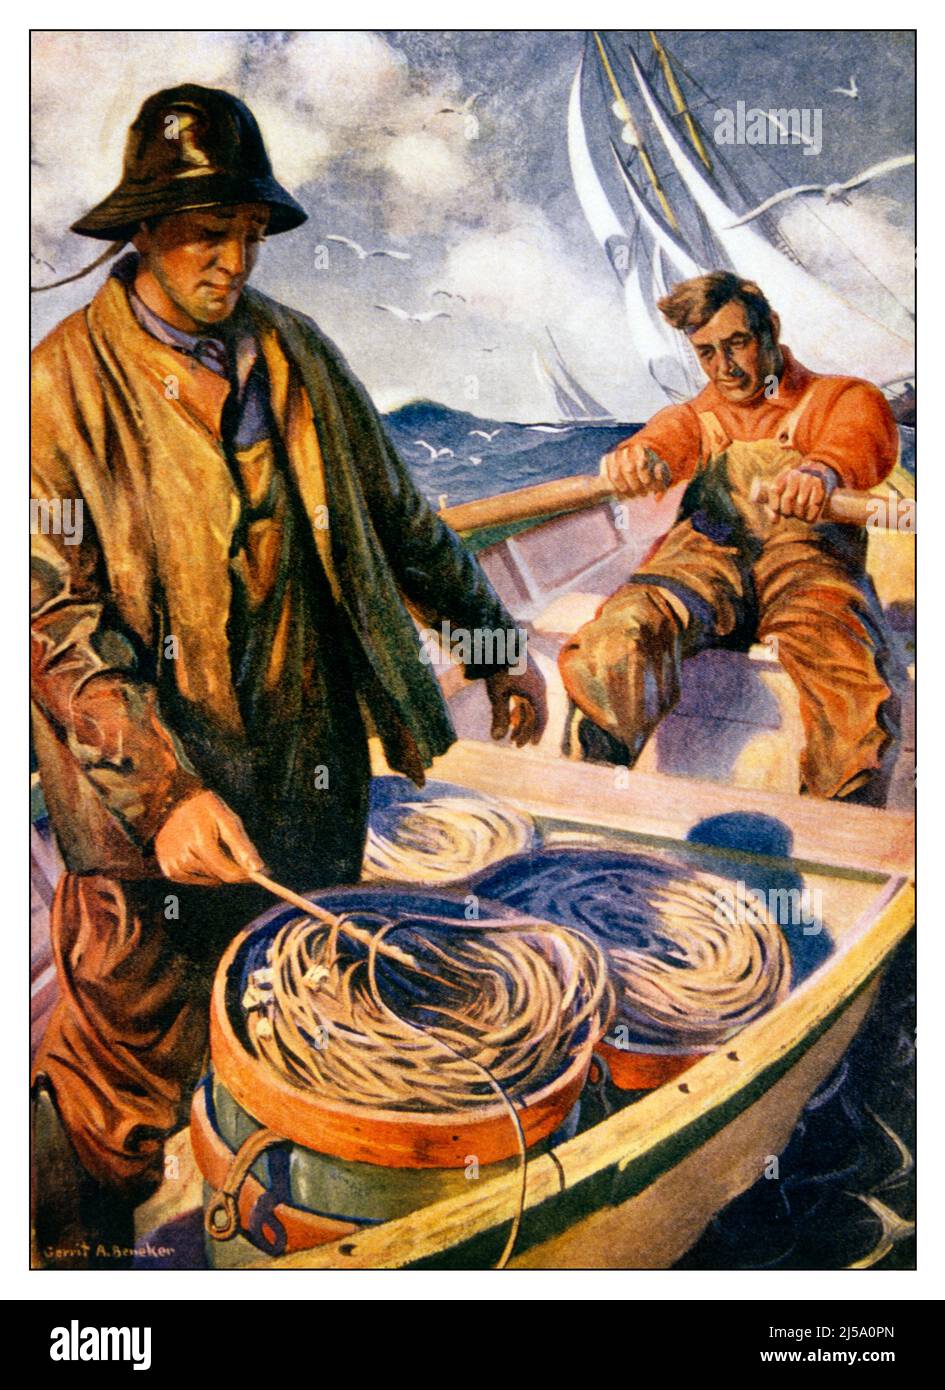 1920s TWO LONGLINE FISHERMEN ONE FEEDING OUT BAITED LINE OTHER ROWING BOAT COVER ART FOR LITERARY DIGEST BY GERRIT A. BENEKER - kf38907 NAW001 HARS FEEDING STYLE WET ROWING CAREER POLE BALANCE SAFETY TEAMWORK COMPETITION COMMERCIAL LIFESTYLE OCEAN COVER JOBS FISHERMAN COPY SPACE FULL-LENGTH HALF-LENGTH PHYSICAL FITNESS PERSONS DANGER MALES RISK PROFESSION HOOK CONFIDENCE CATCHING SKILL OCCUPATION SKILLS STRENGTH COURAGE CAREERS POWERFUL LABOR PRIDE REEL AT BY EMPLOYMENT OARS OCCUPATIONS CONCEPTUAL DIGEST ATTACHED ANGLING INFRASTRUCTURE EMPLOYEE CAPE ANN LITERARY OILSKIN TECHNIQUE WILDLIFE Stock Photo